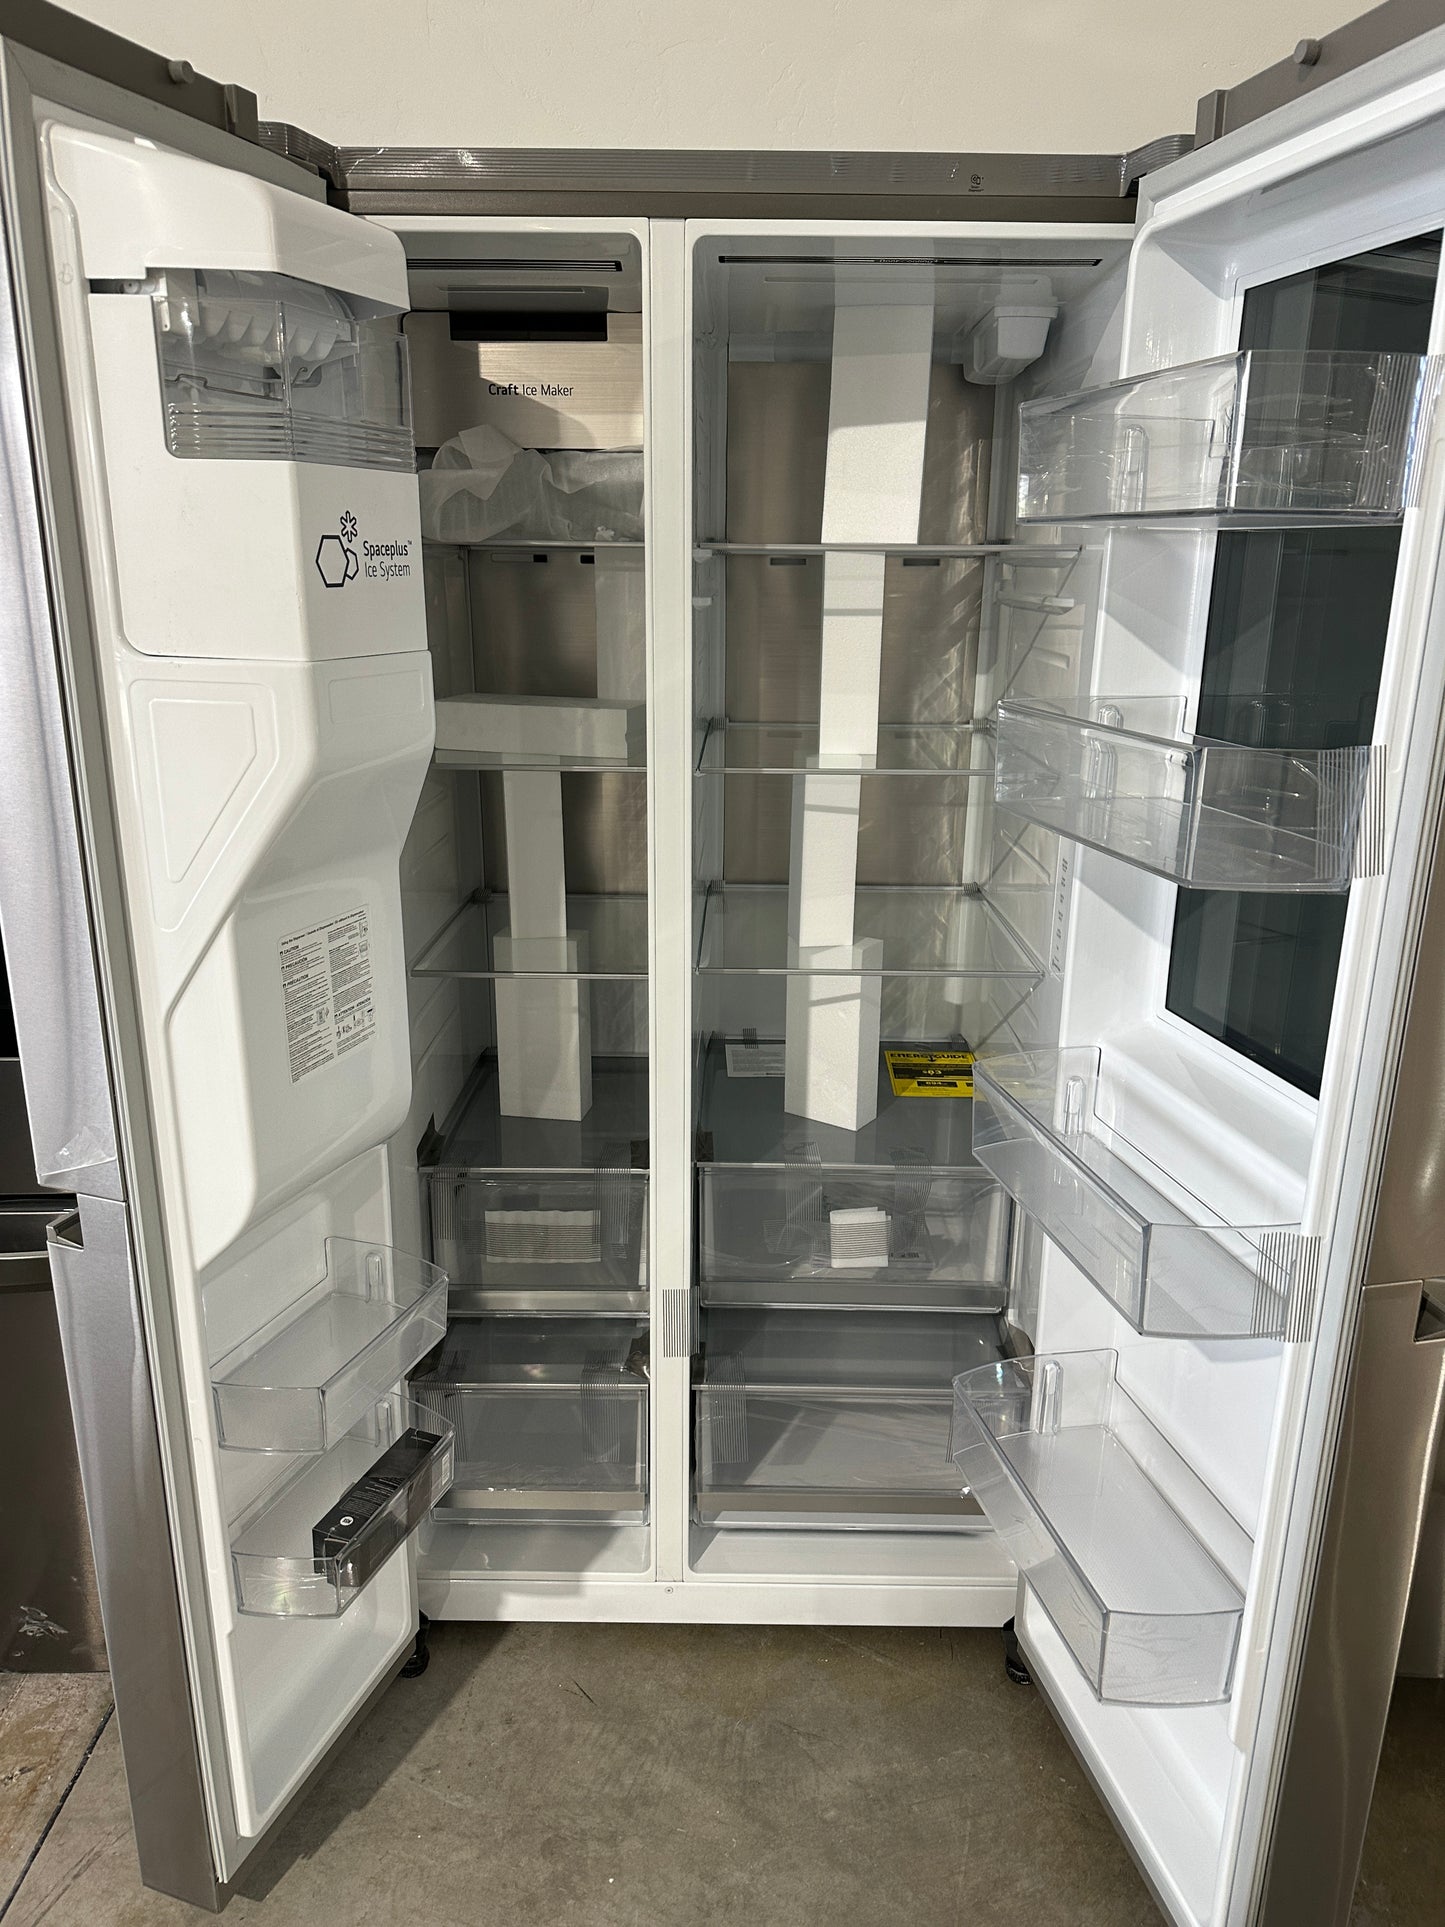 SIDE BY SIDE LG REFRIGERATOR with CRAFT ICE - REF11937S LRSOS2706S